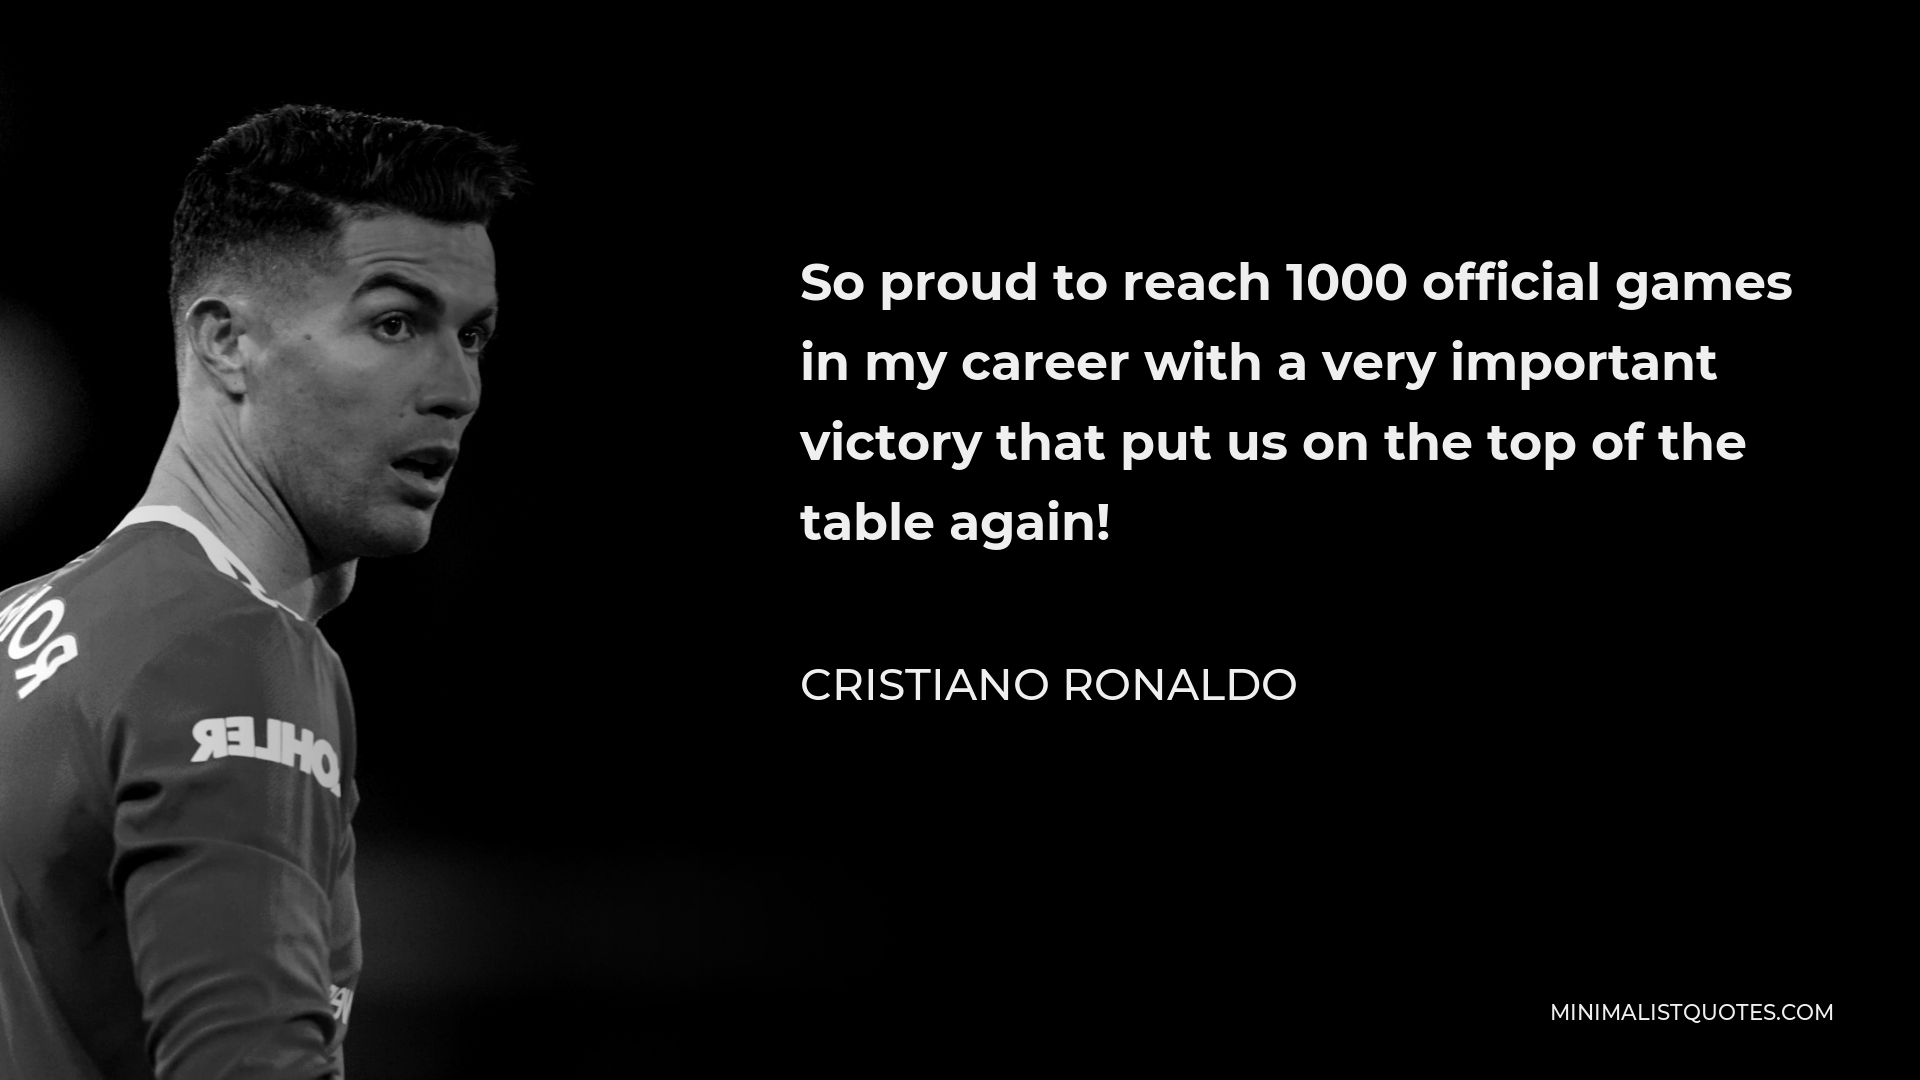 Cristiano Ronaldo Quote - So proud to reach 1000 official games in my career with a very important victory that put us on the top of the table again!